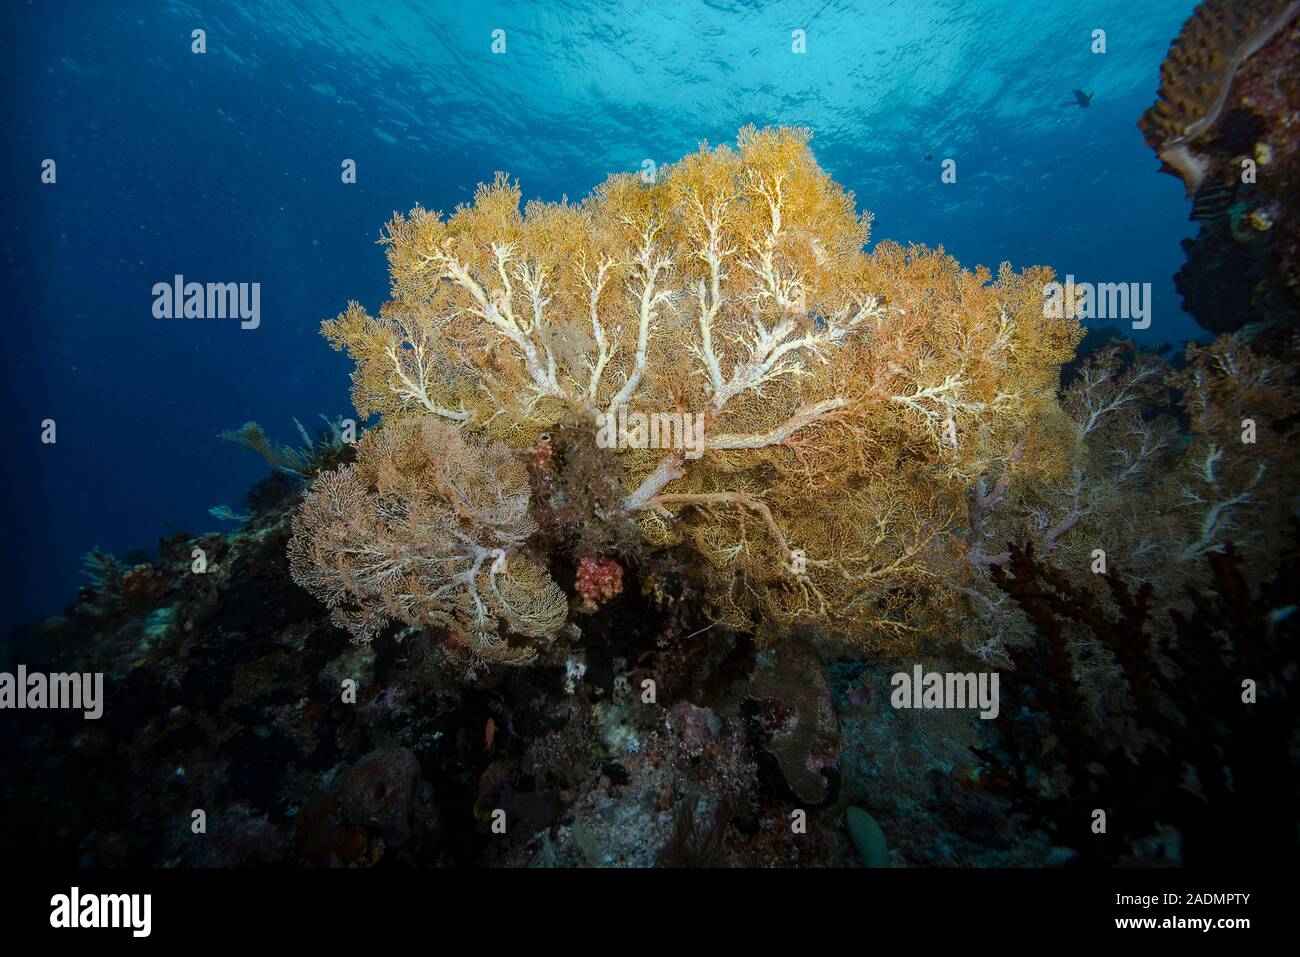 Underwater Tropical Coral Reef Stock Photo